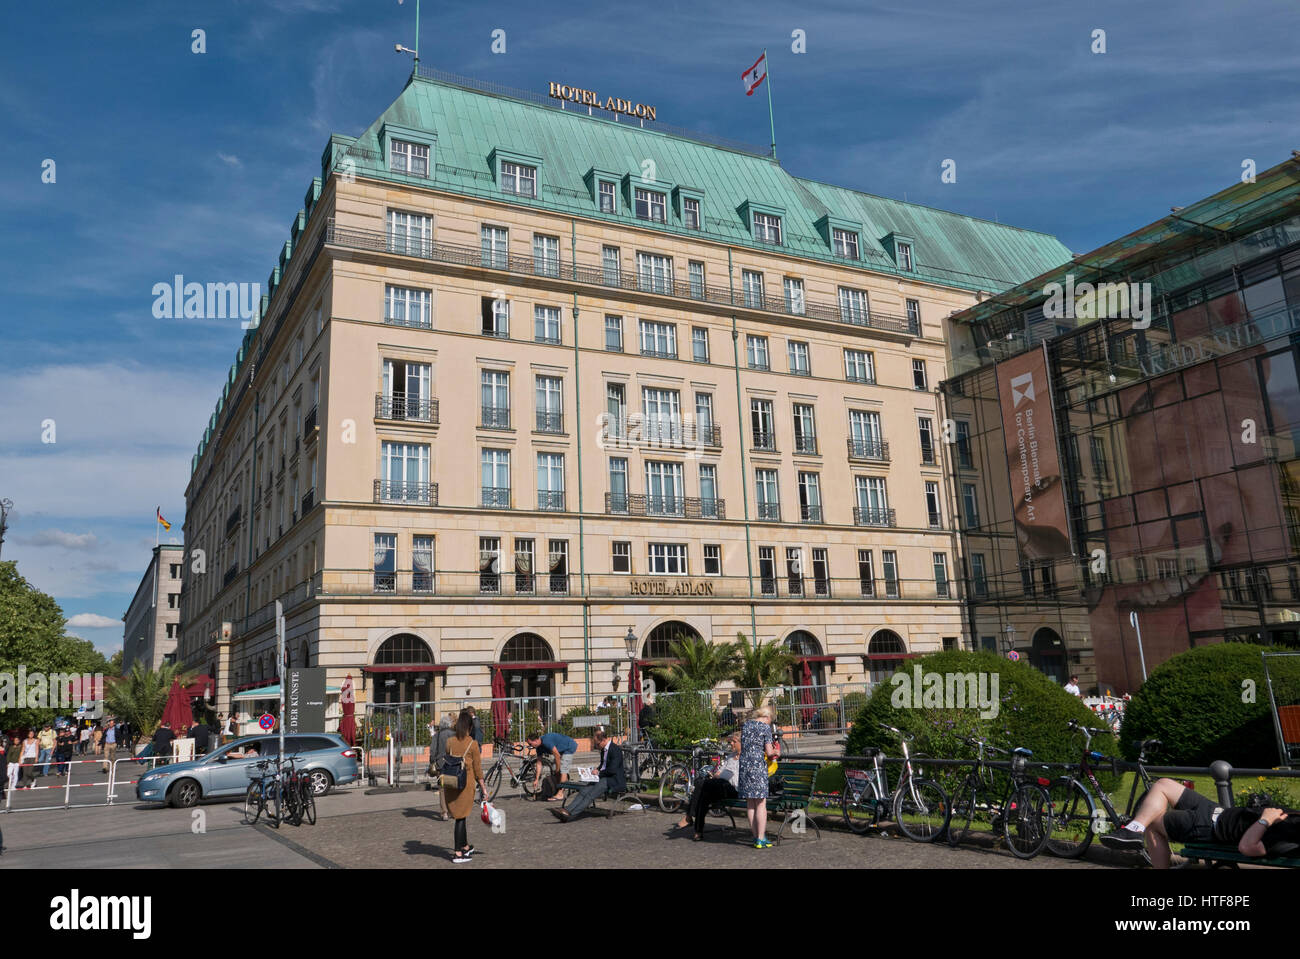 The exterior of the famous Adlon Hotel, Berlin, Germany Stock Photo